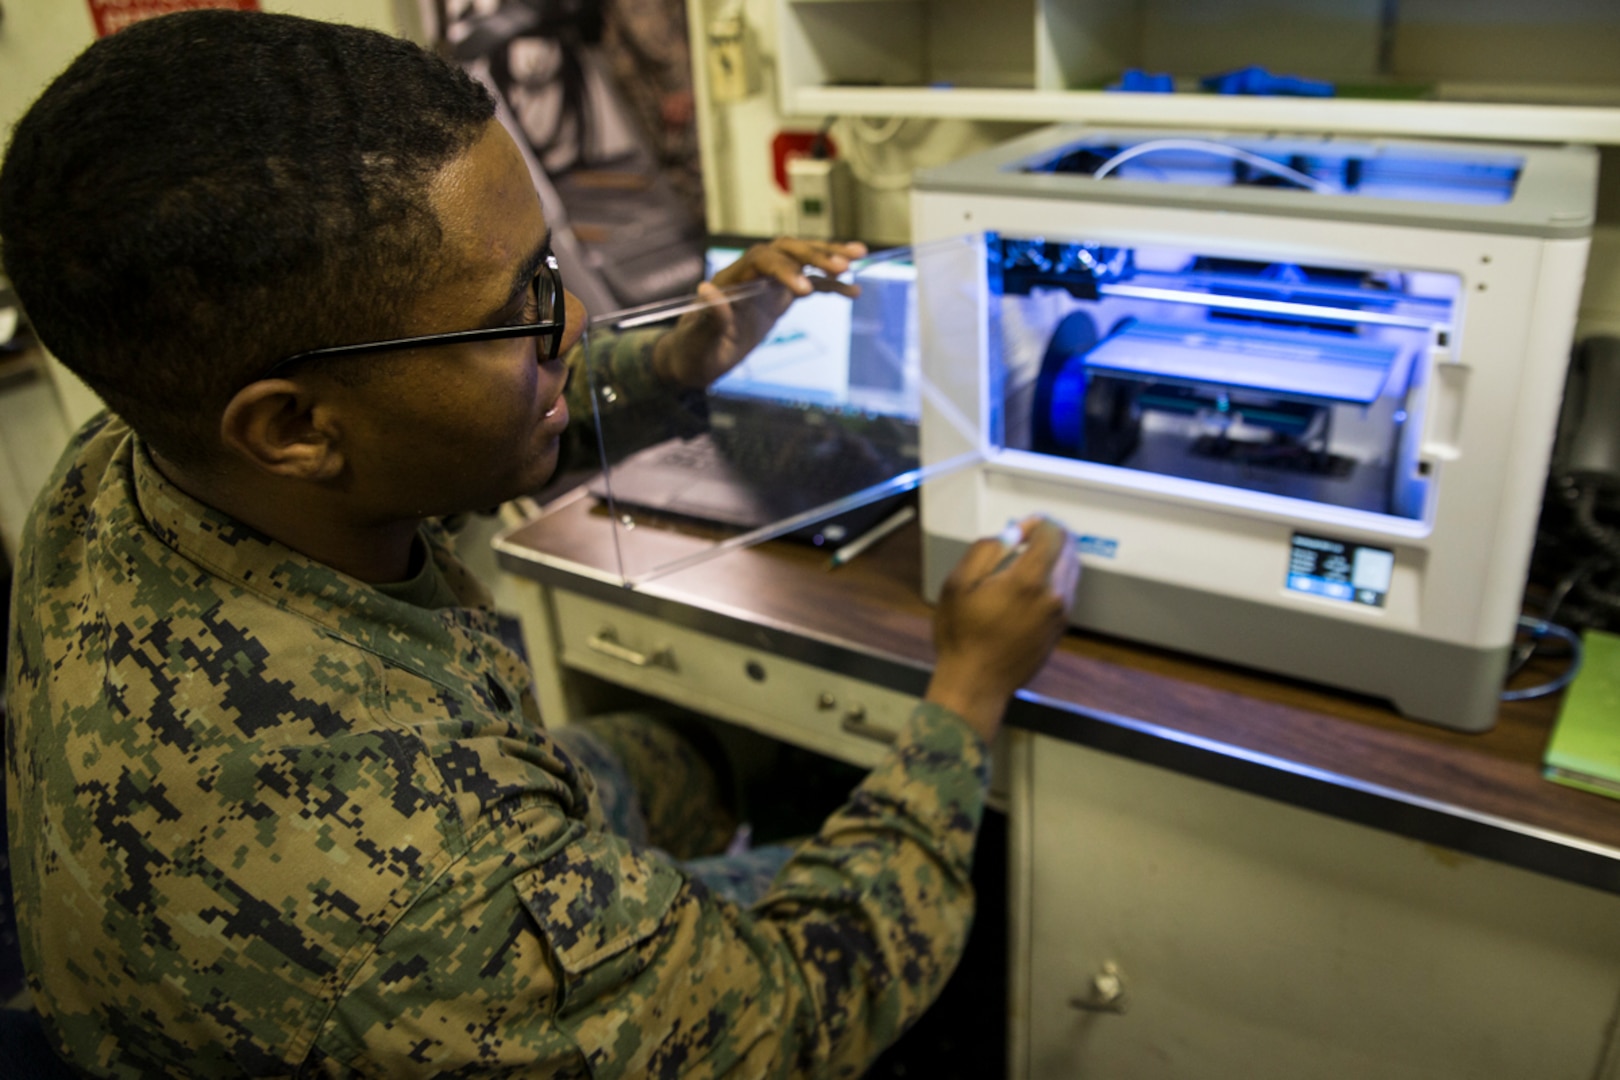 Sgt. Adrian Willis, a computer and telephone technician with Combat Logistic Battalion 31, 31st Marine Expeditionary Unit, explains the functions of a 3-D printer aboard the USS Wasp while underway in the Pacific Ocean, March 22, 2018. Marines with CLB-31 are now capable of ‘additive manufacturing,’ also known as 3-D printing, which is the technique of replicating digital 3-D models as tangible objects. The 31st Marine Expeditionary Unit partners with the Navy’s Amphibious Squadron 11 to form the Wasp Amphibious Ready Group, a cohesive blue-green team capable of accomplishing a variety of missions across the Indo-Pacific.